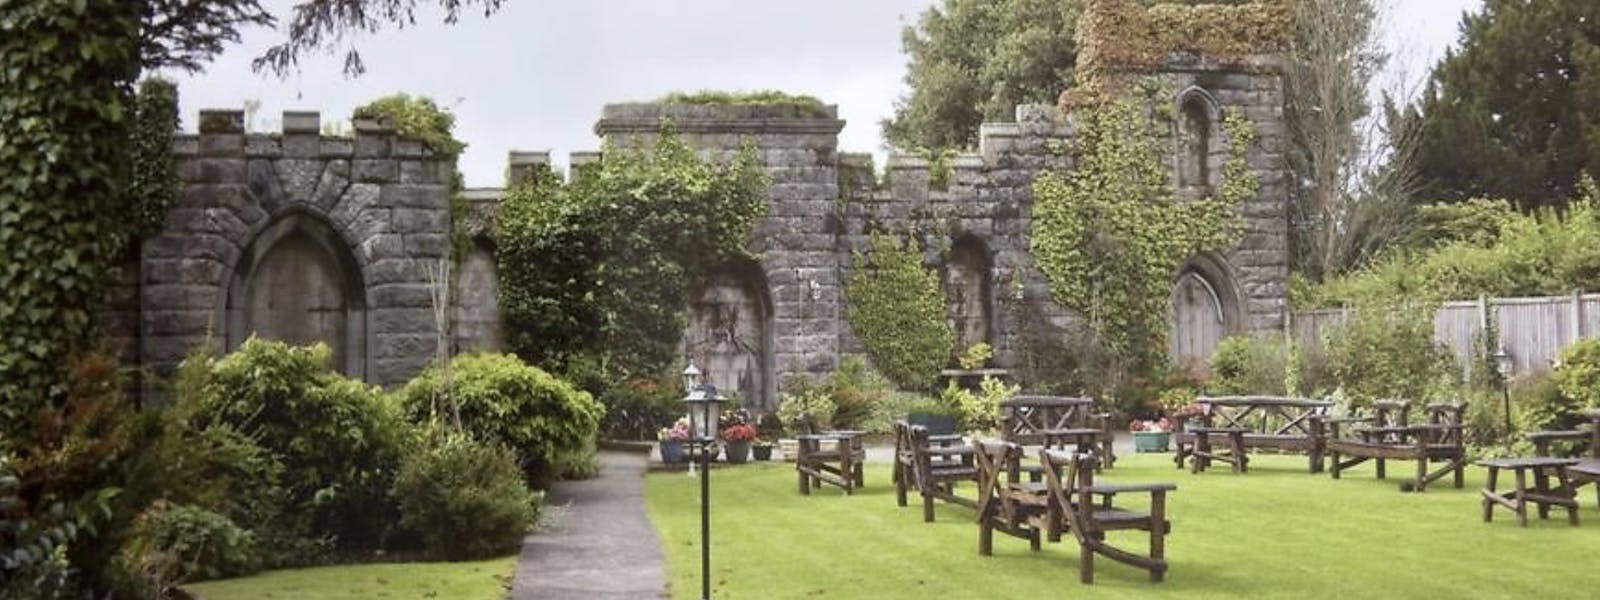 Enjoy the charm of Lonsdale House's Secret Garden, which is private and safe